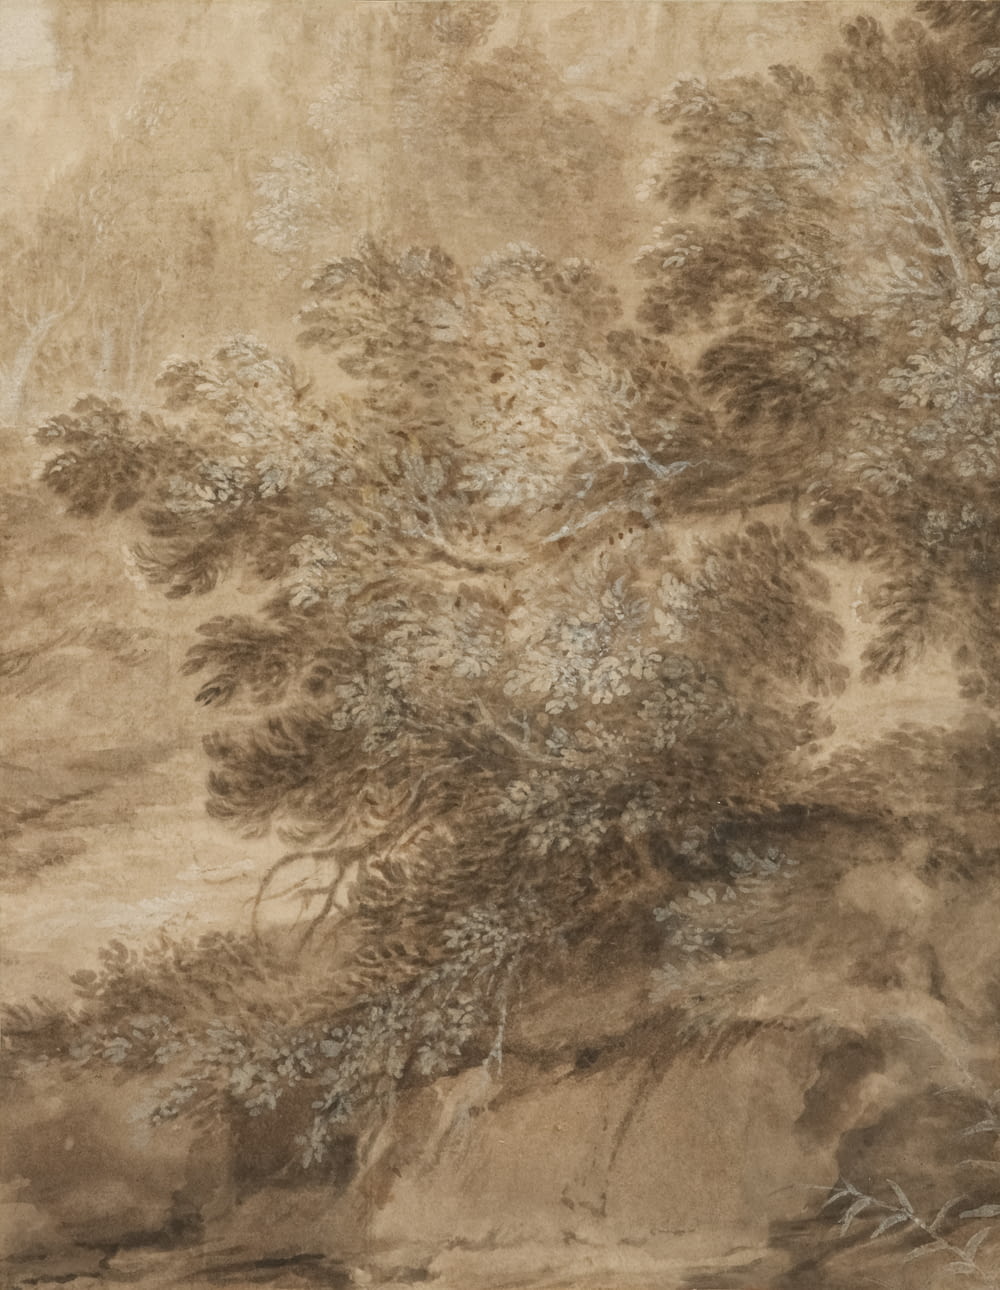 a painting of trees in a wooded area